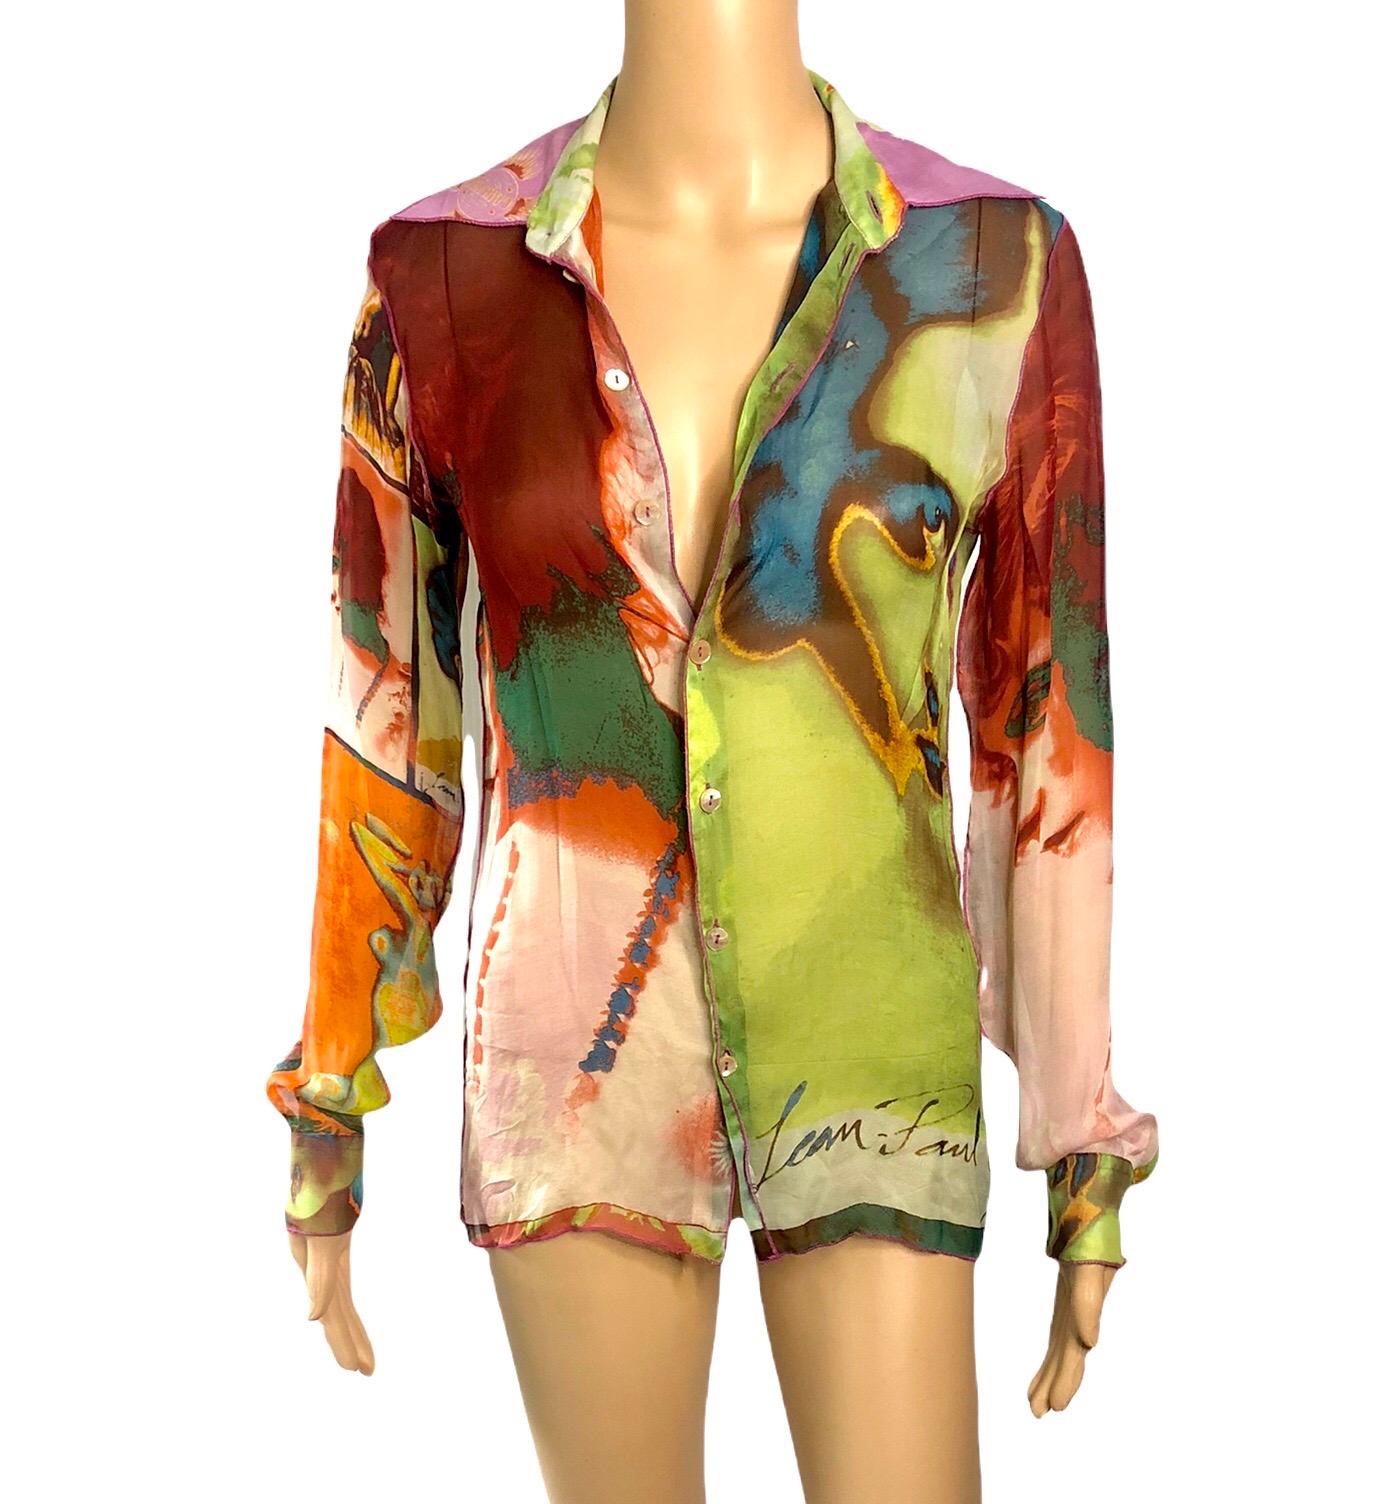 Jean Paul Gaultier c.1990 Vintage “Portraits” Print Sheer Blouse Shirt Top

Please note size tag has been removed. This item will fit size S/M.

